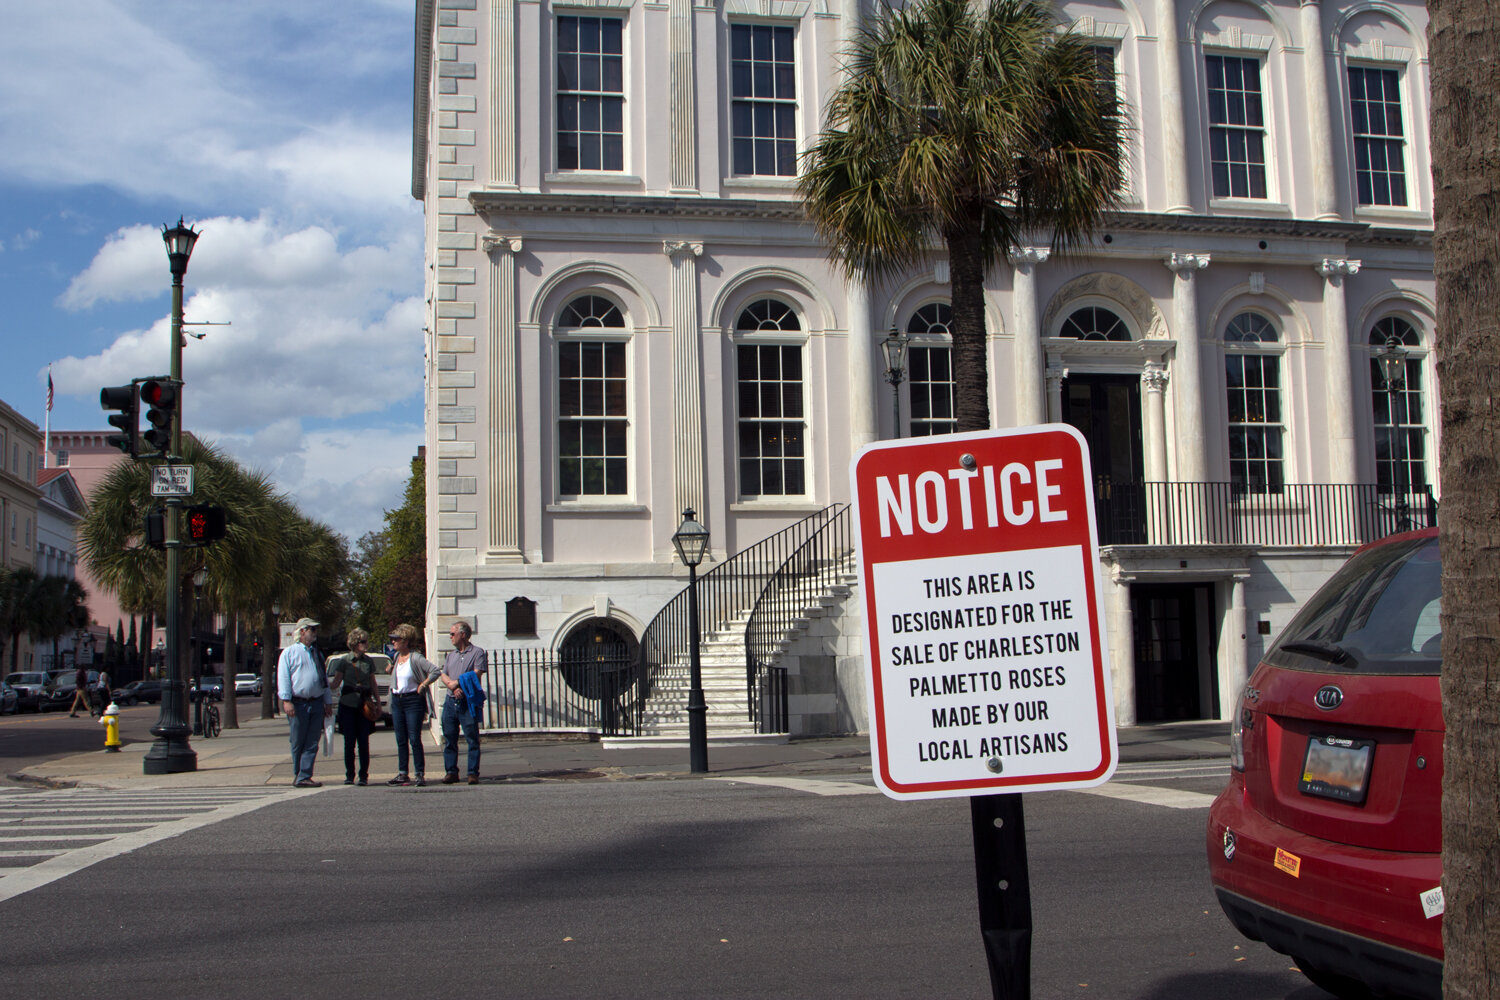  Location: Charleston City Hall at Meeting St. and Broad St. , Charleston S.C. “Four Corners of Law” - Crossroads featuring four historic buildings used by federal, state, local &amp; religious institutions. 